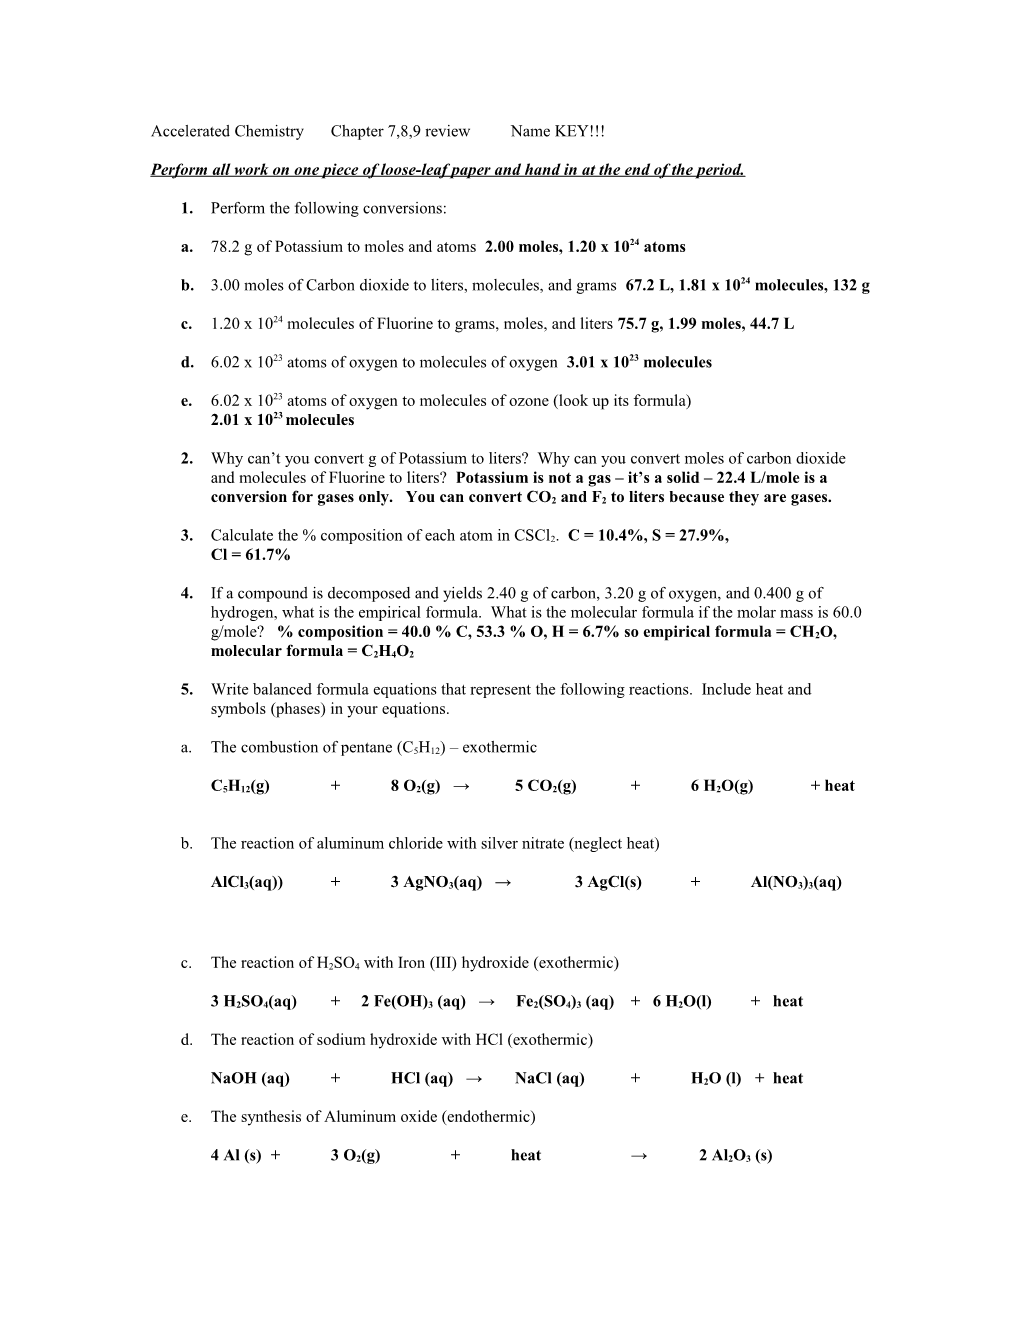 Accelerated Chemistry Chapter 7,8,9 Review Name KEY